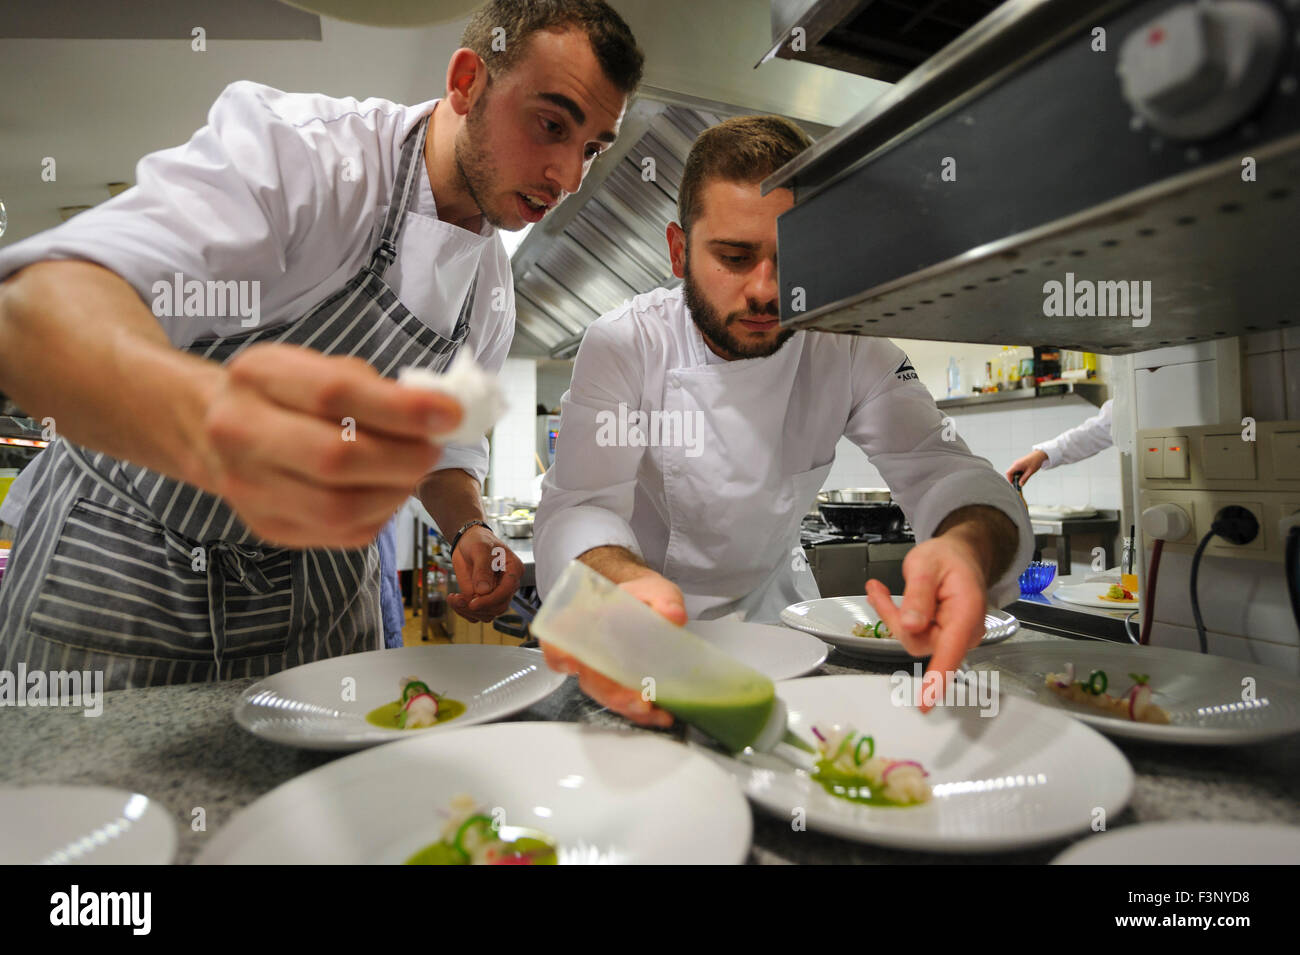 Chefs plating gourmet food Stock Photo